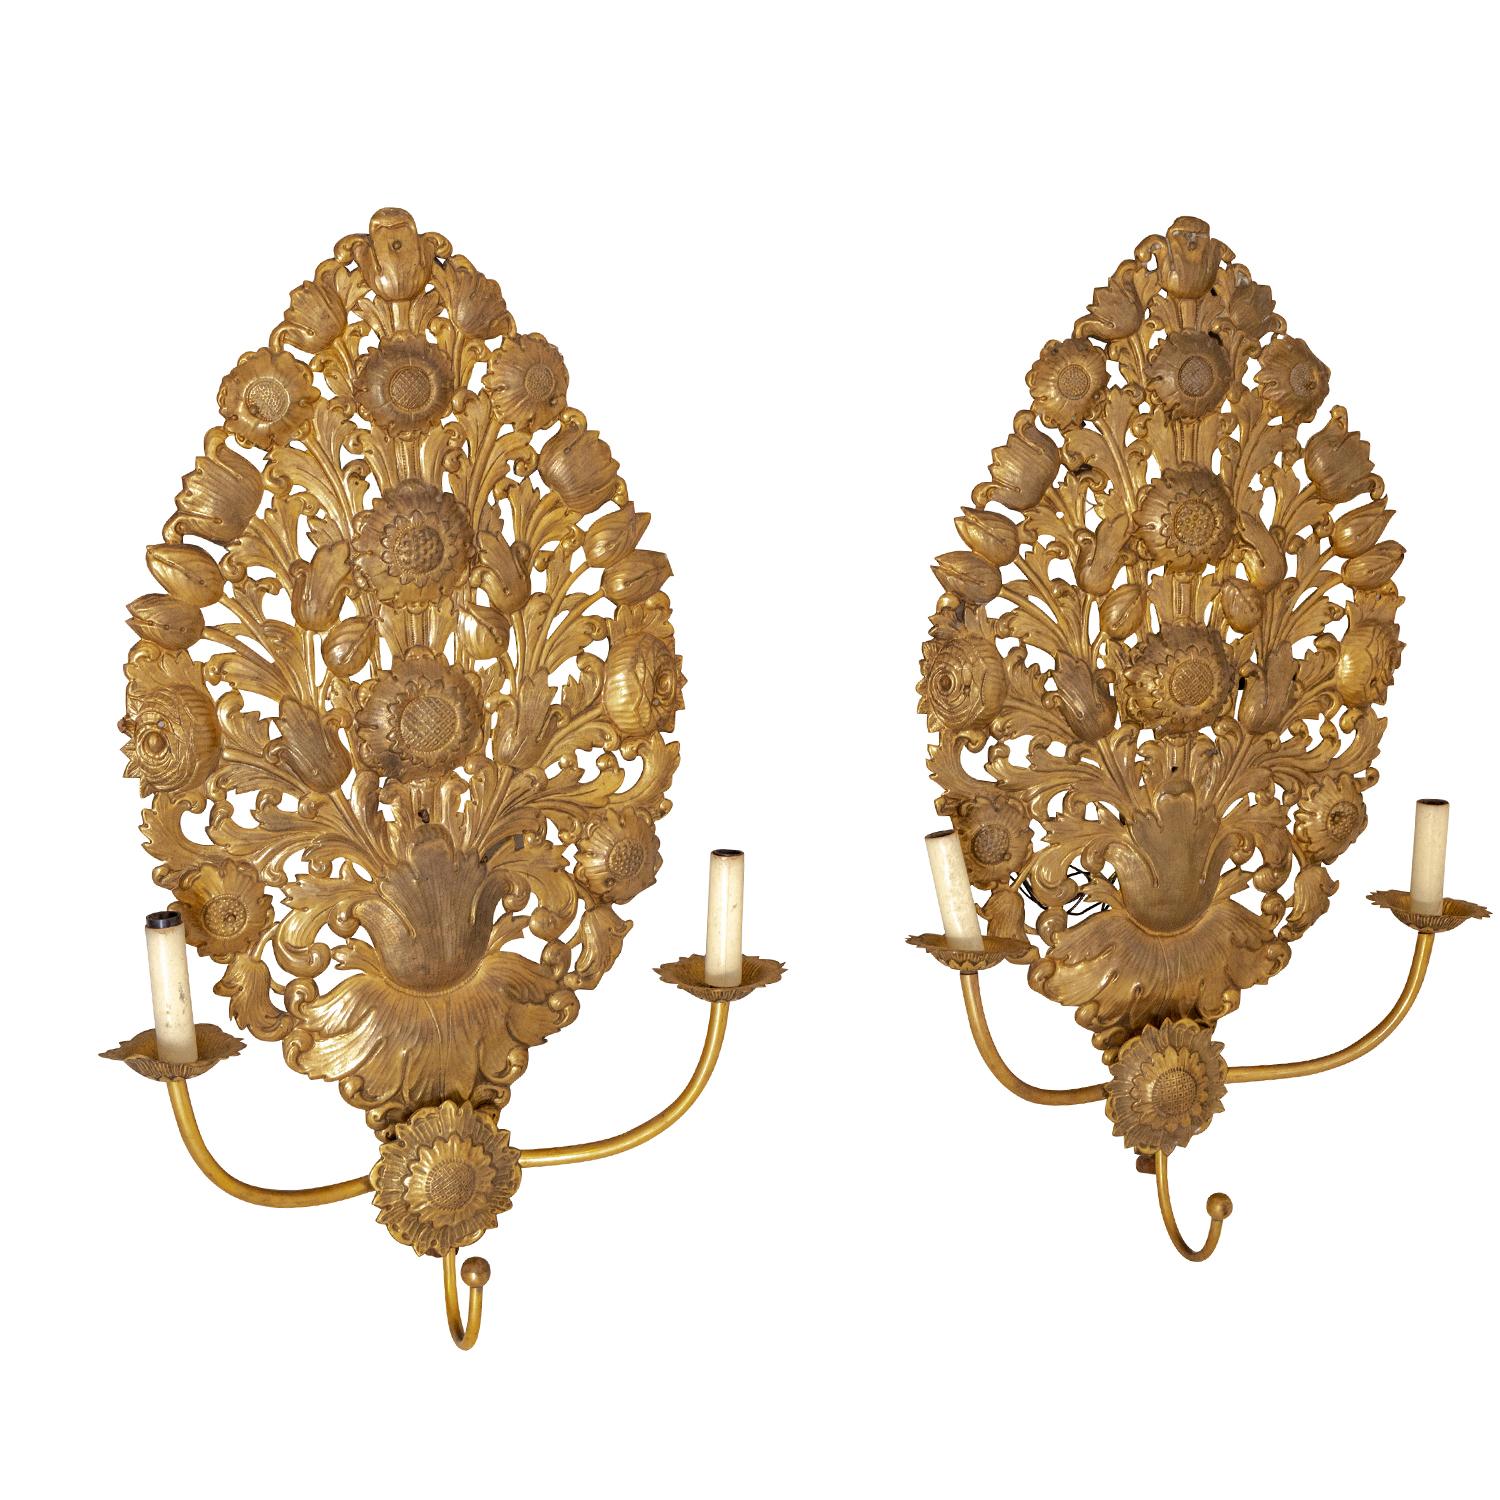 Gilt 19th Century French Baroque Pair of Antique Gilded Brass Wall Appliques, Sconces For Sale